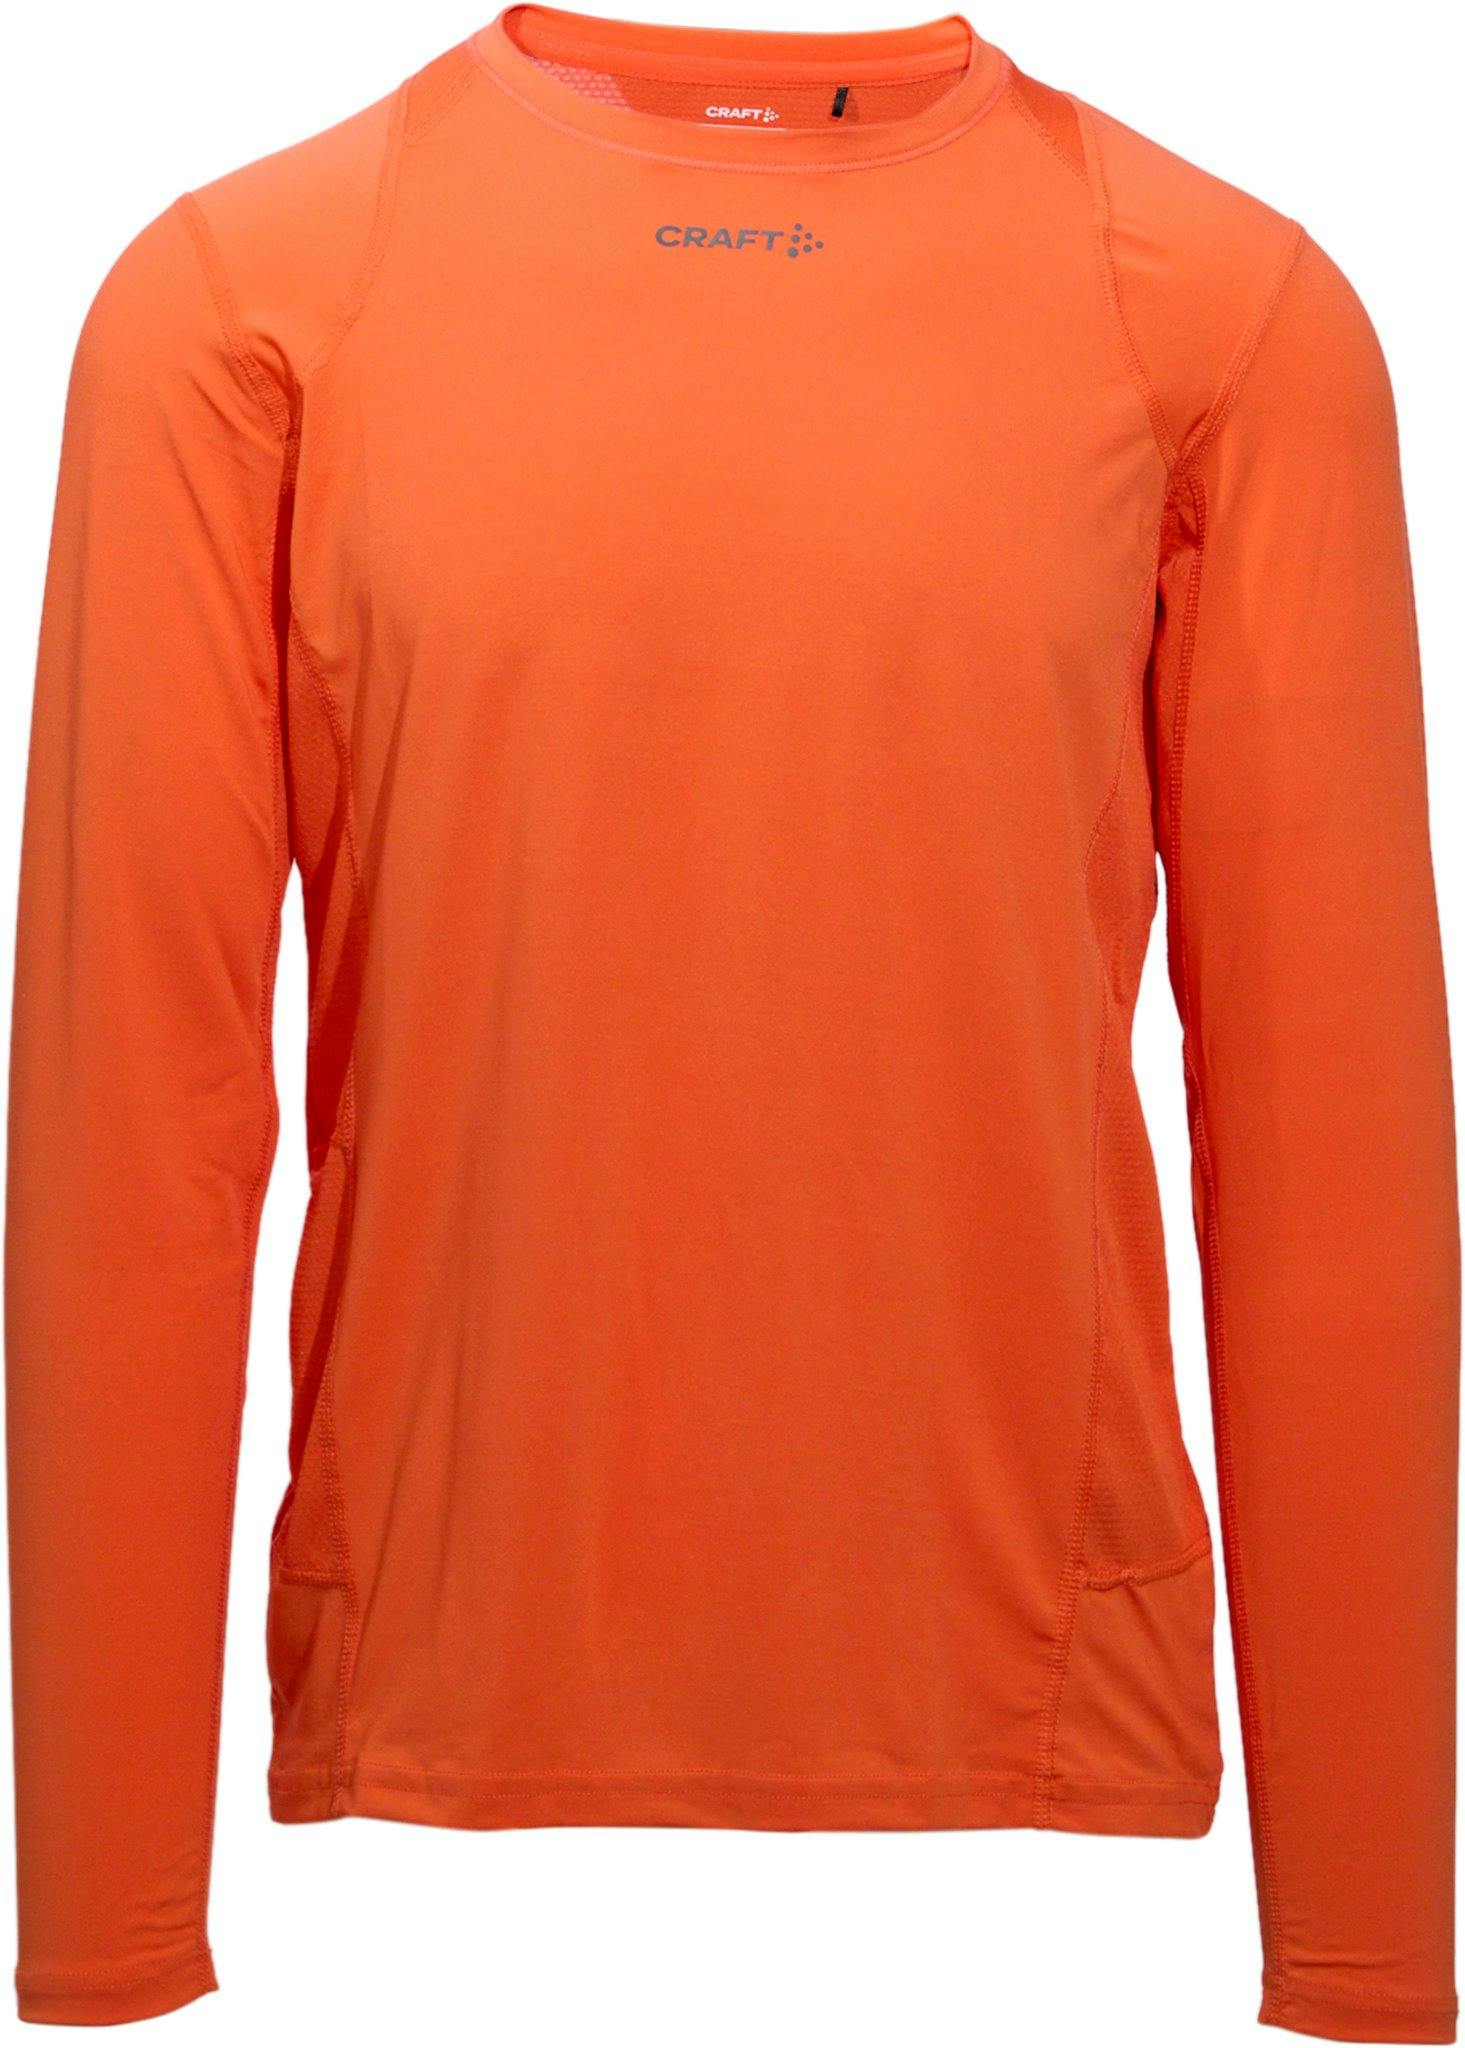 Product image for ADV Essence Long Sleeve T-Shirt - Men's